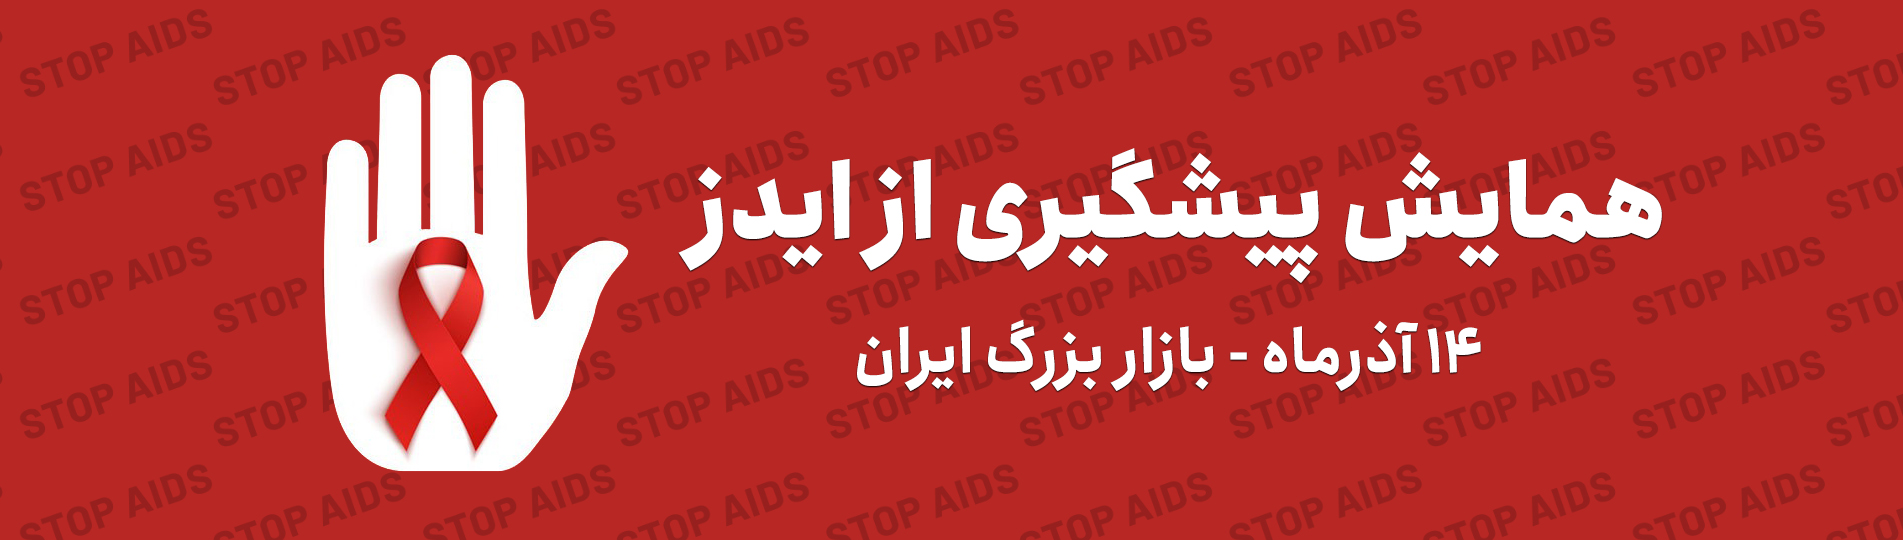 Seminar on AIDS prevention Holds at Iran Mall Exhibition Center